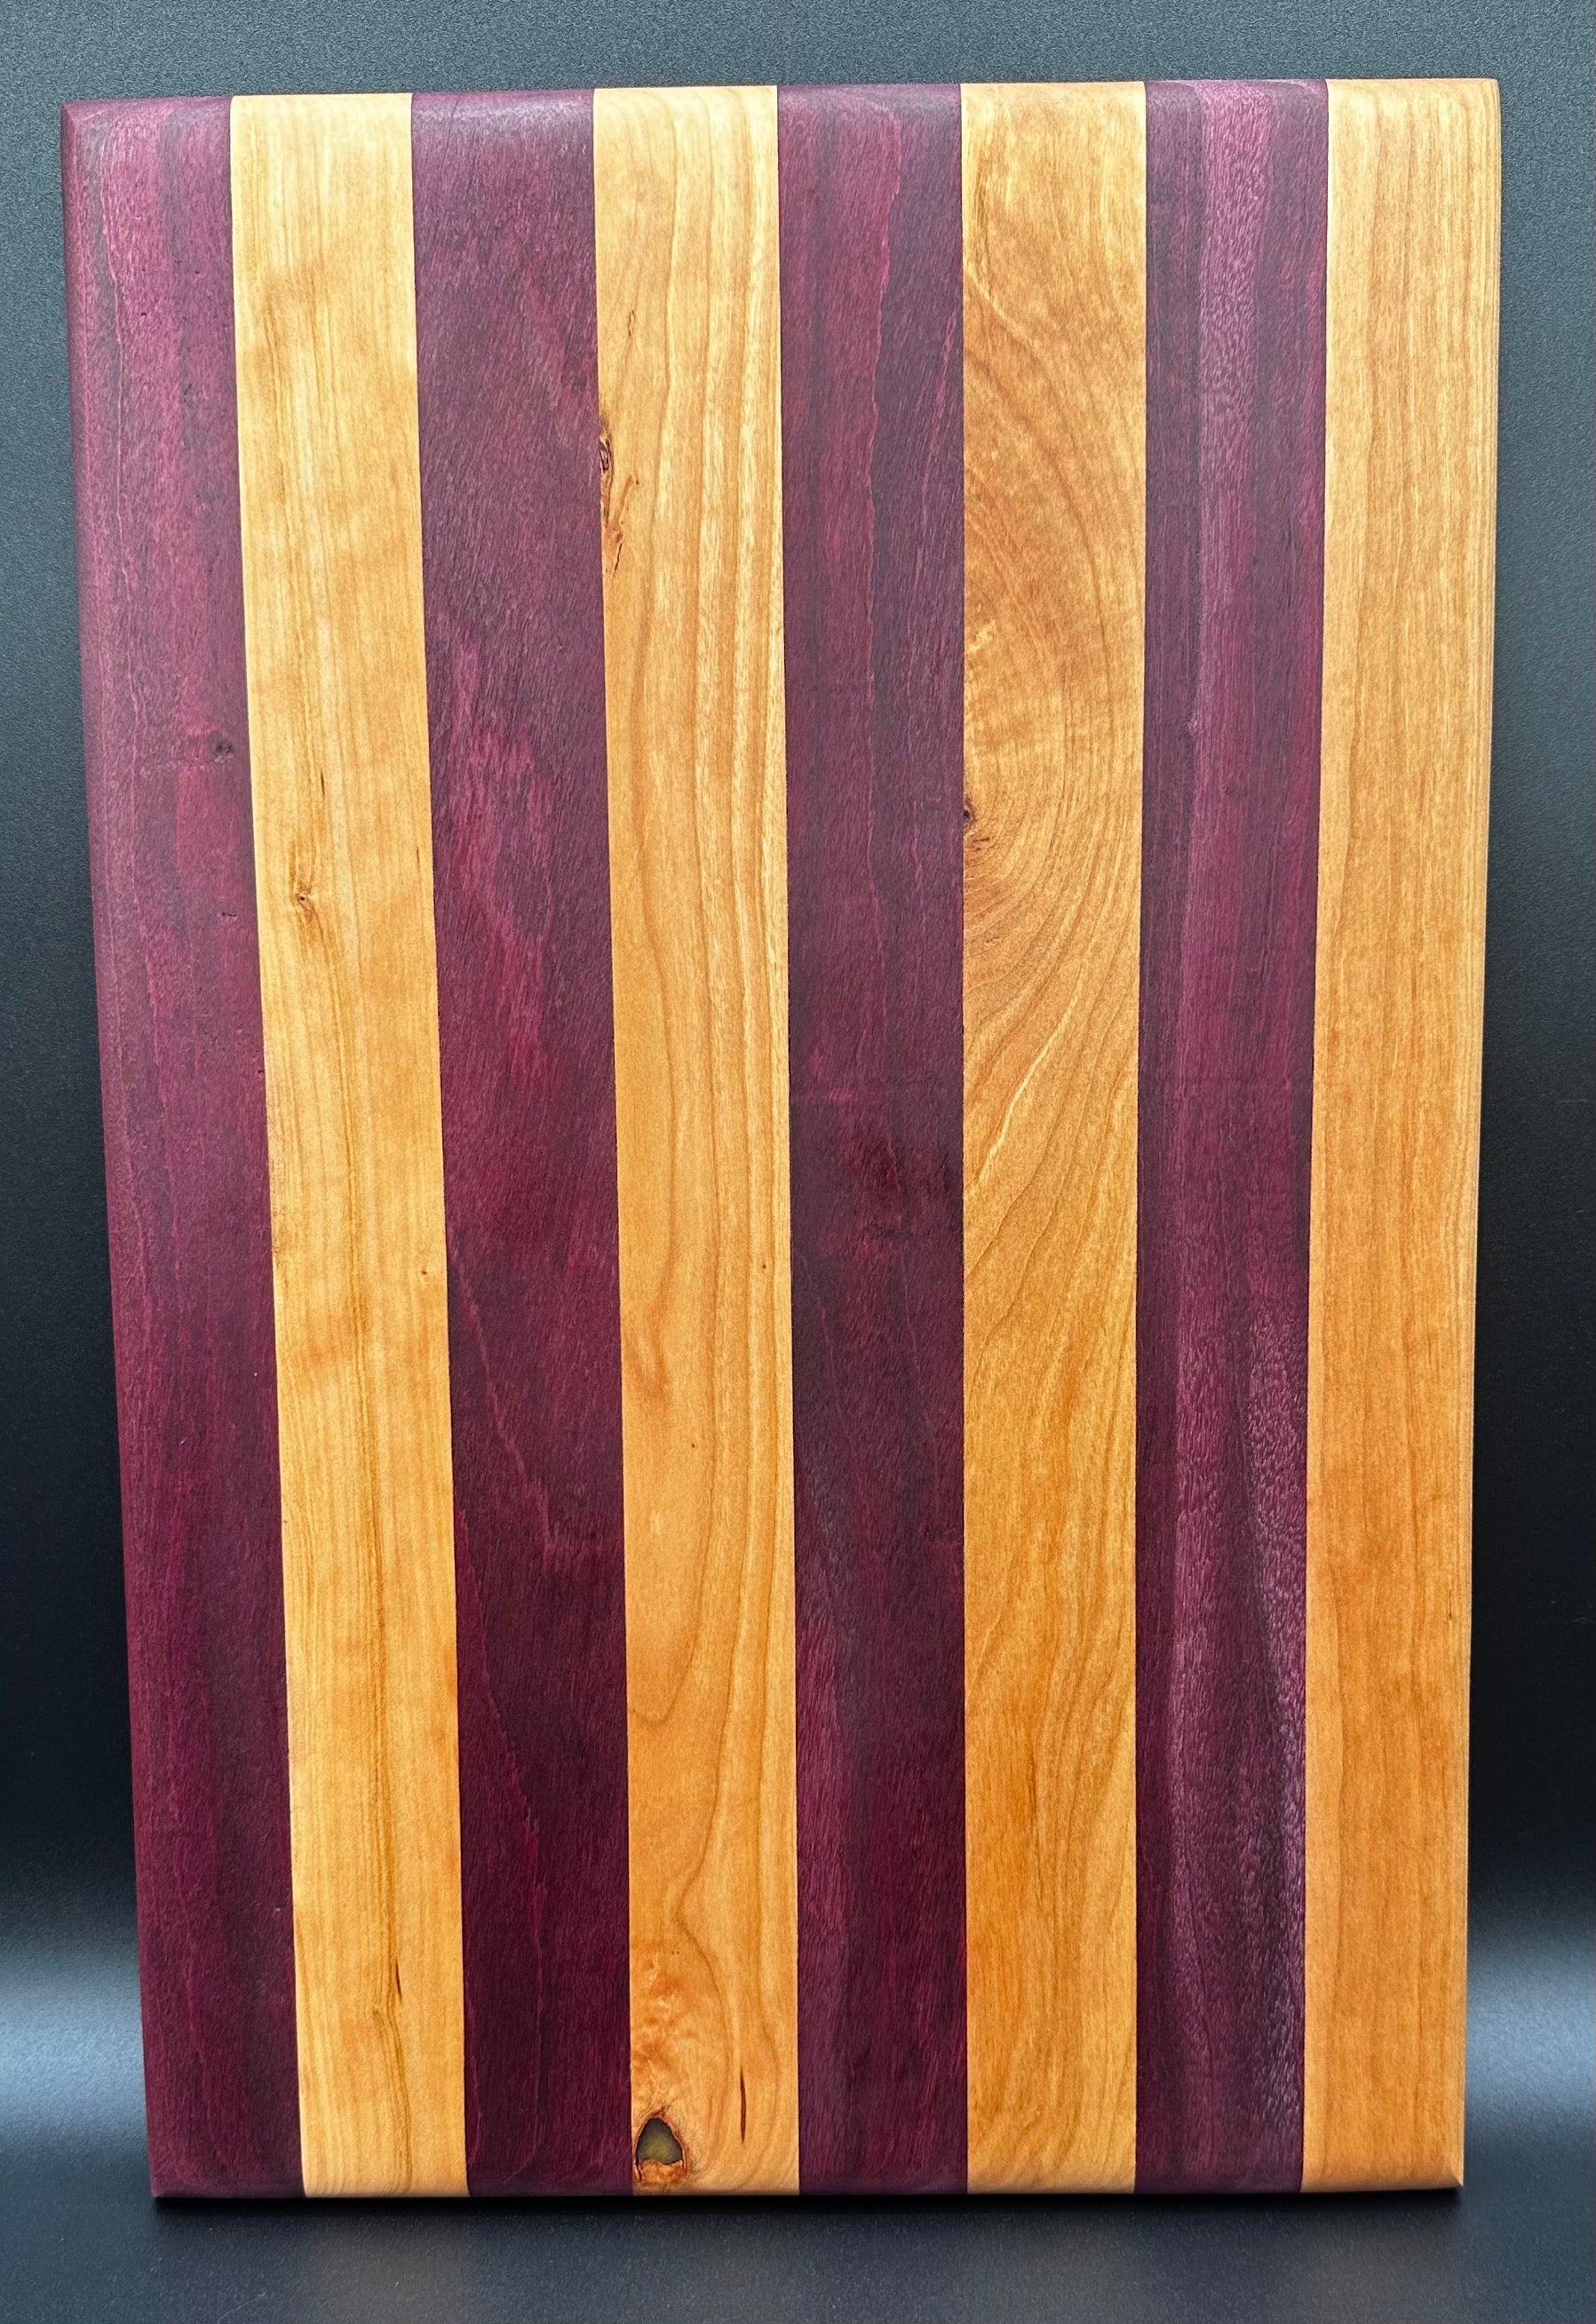 Montana Made Cutting Board with Handle in Walnut, Purpleheart and Cherry -  SMW Designs